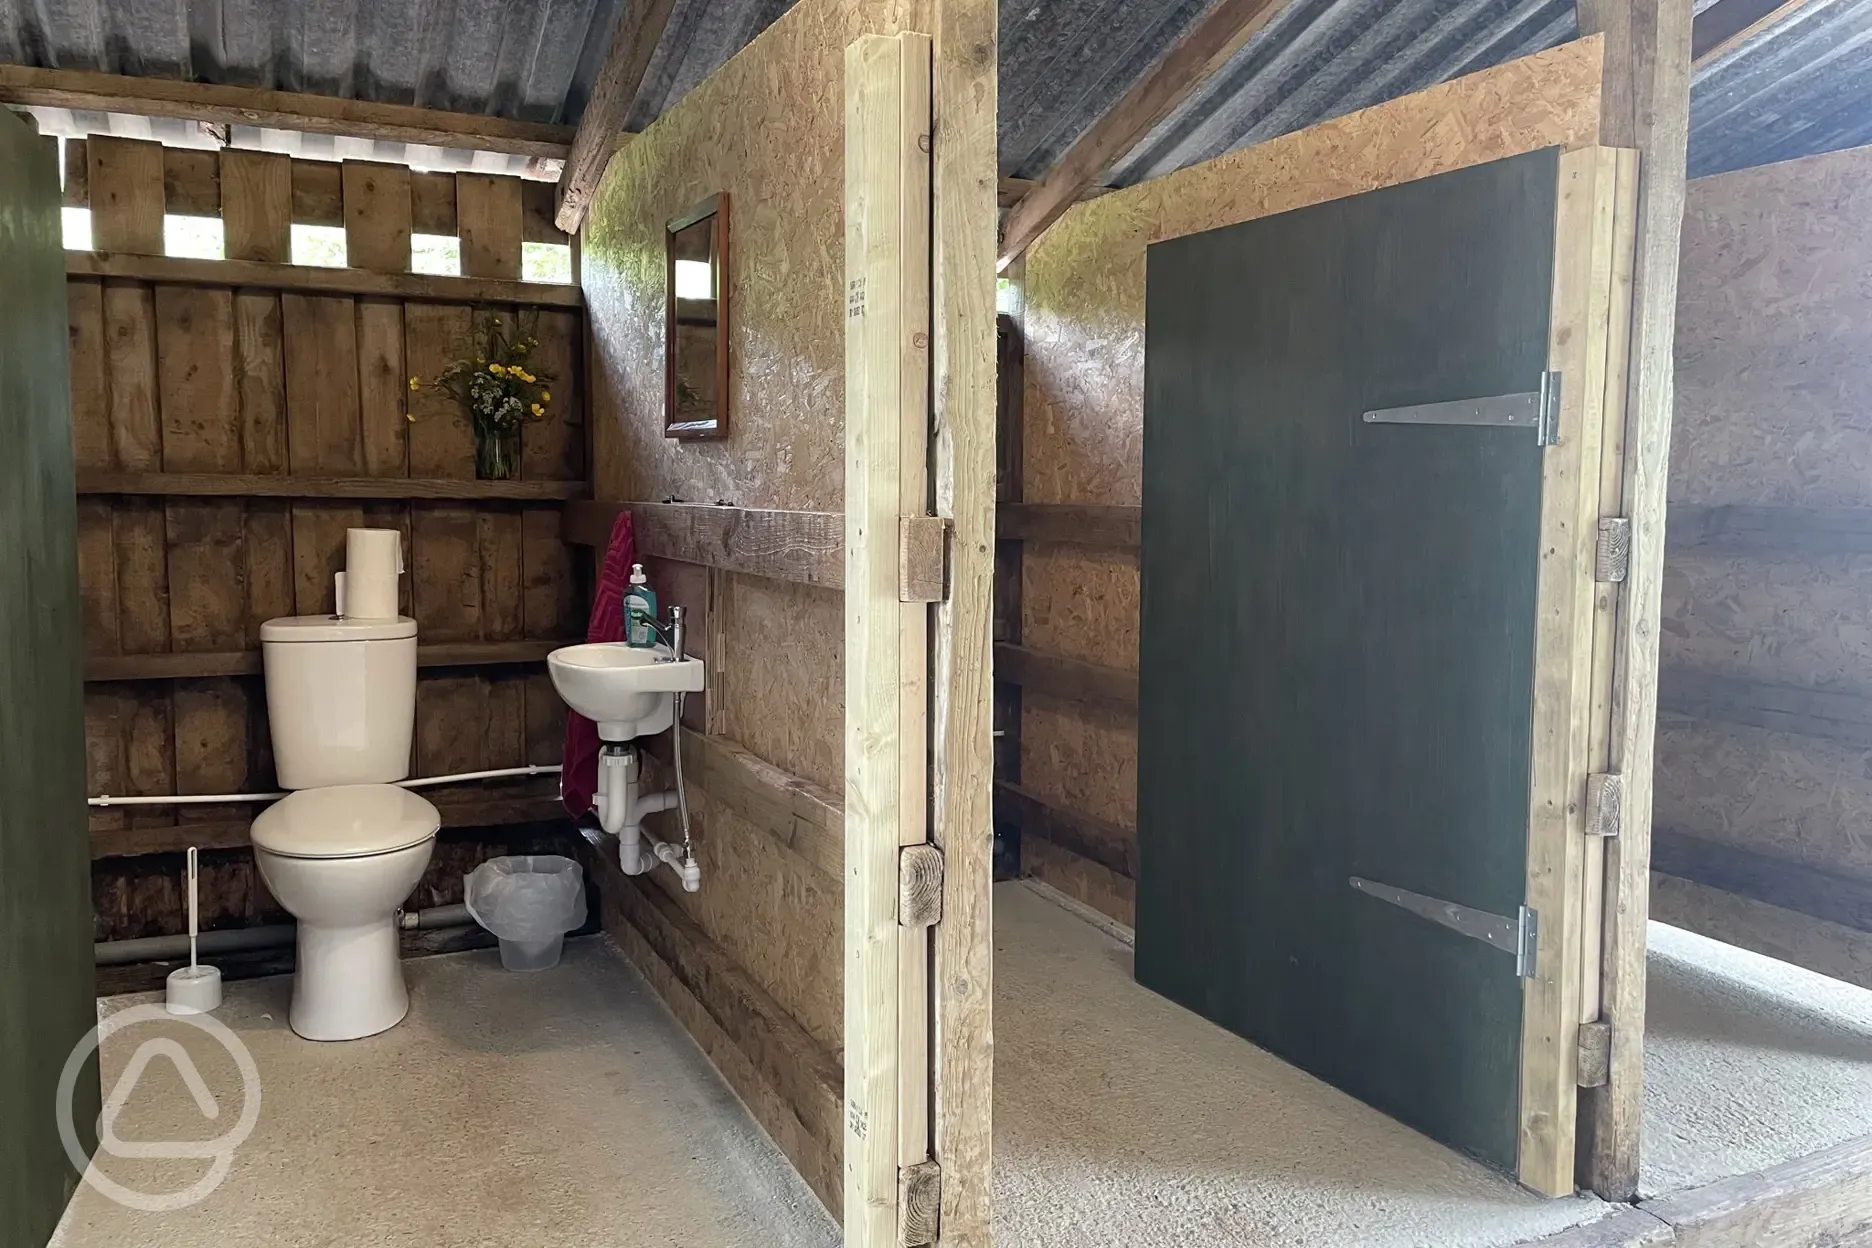 The Cowshed Toilet and Shower block